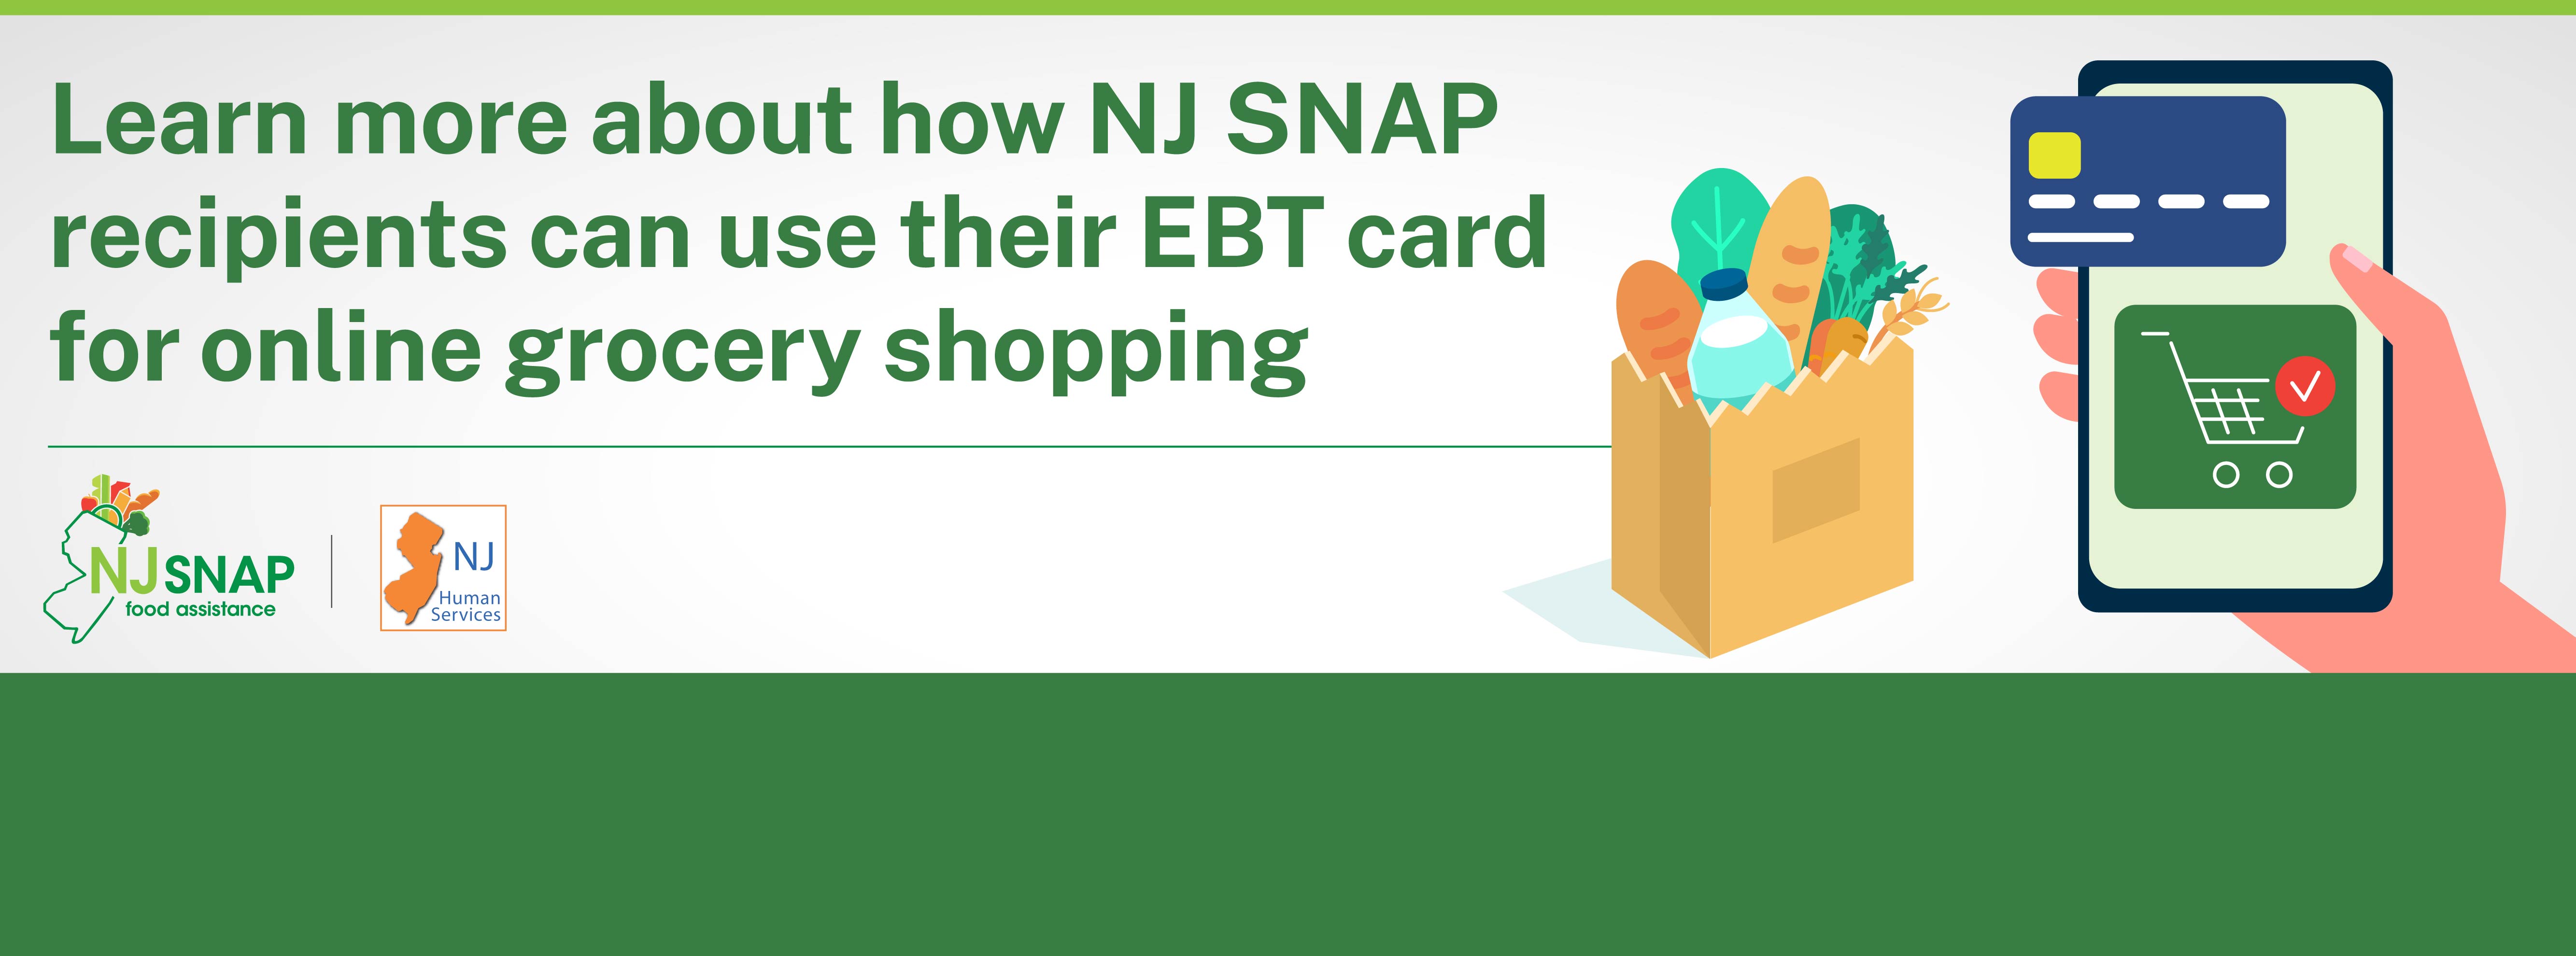  NJ SNAP recipients will be able to use their benefits card to order groceries from Amazon starting on May 27. Walmarts, ShopRites and The Fresh Grocers that that provide online shopping will also accept online ordering with SNAP benefits starting on